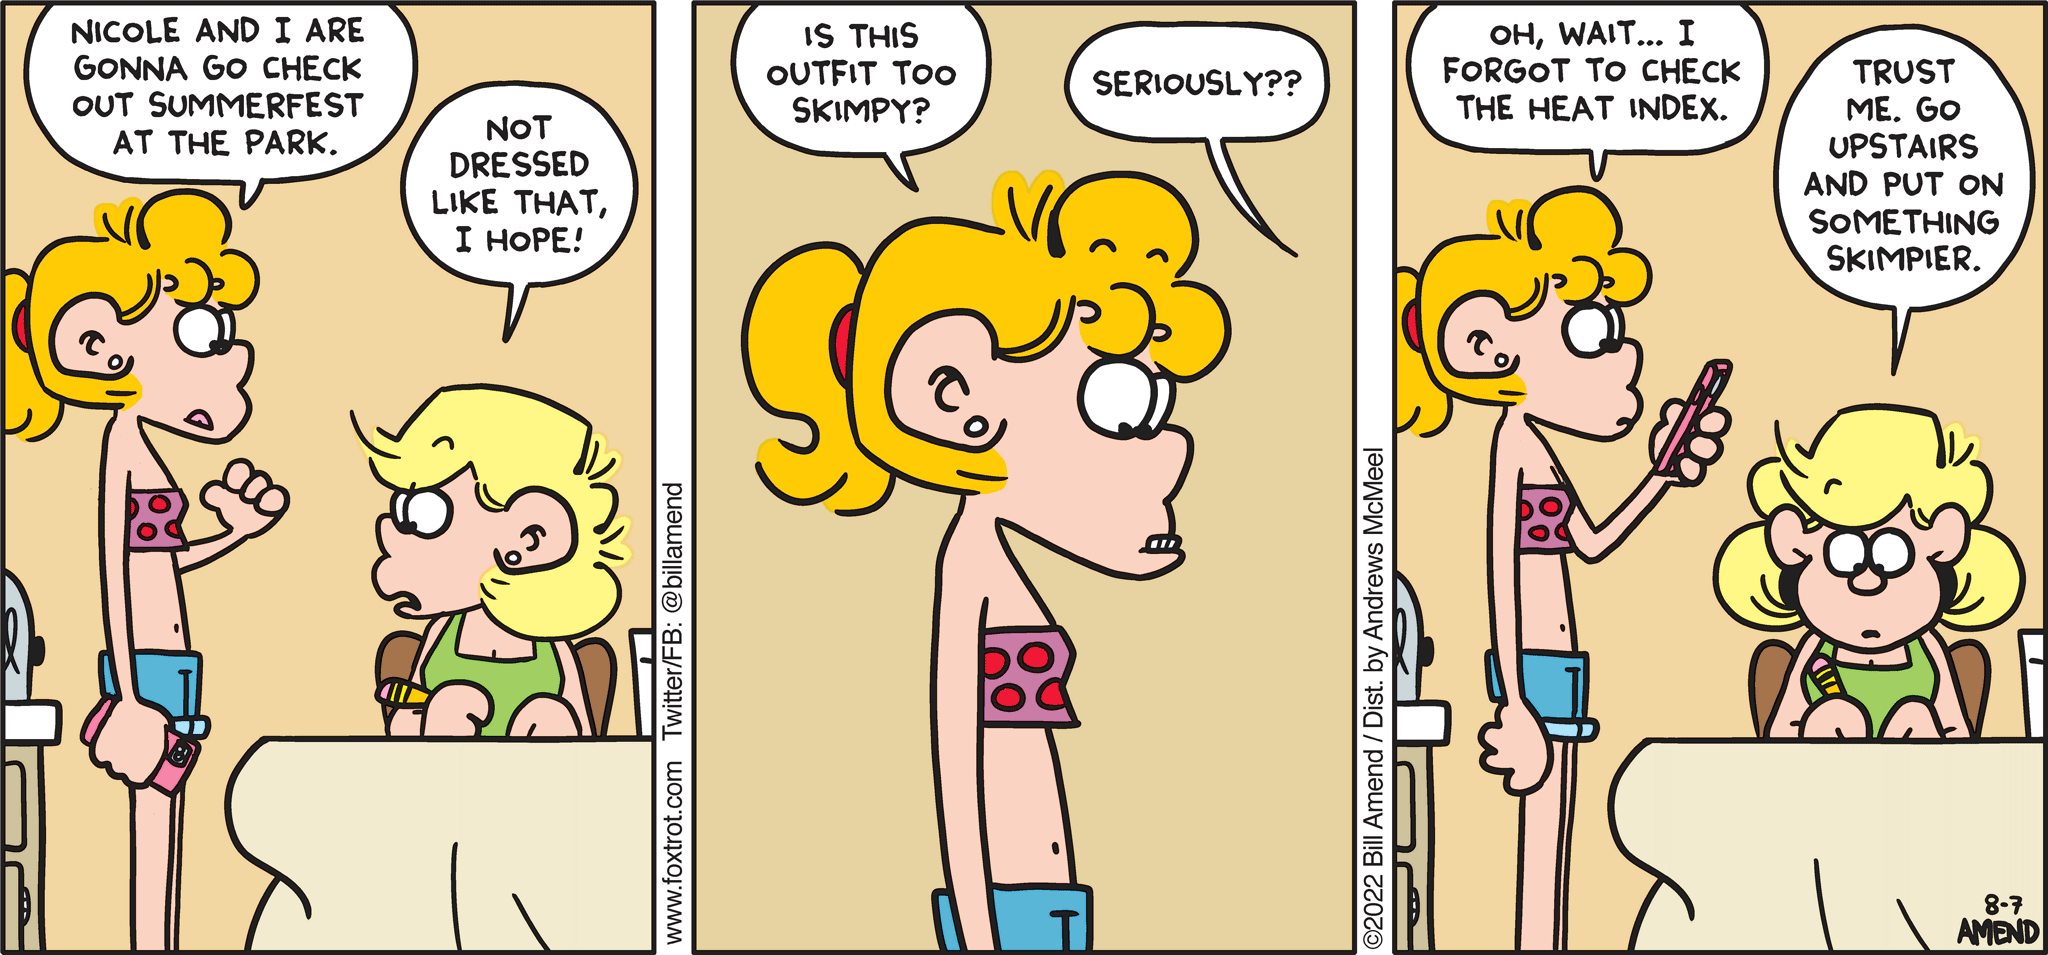 FoxTrot comic strip by Bill Amend - "Skimping" published August 7, 2022 - Transcript: Paige Fox: Nicole and I are gonna go check out Summerfest at the park. Andy Fox: Not dressed like that, I hope! Paige Fox: Is this outfit too skimpy? Andy Fox: Seriously?? Paige Fox: Oh, wait... I forgot to check the heat index. Andy Fox: Trust me. Go upstairs and put on something skimpier. 